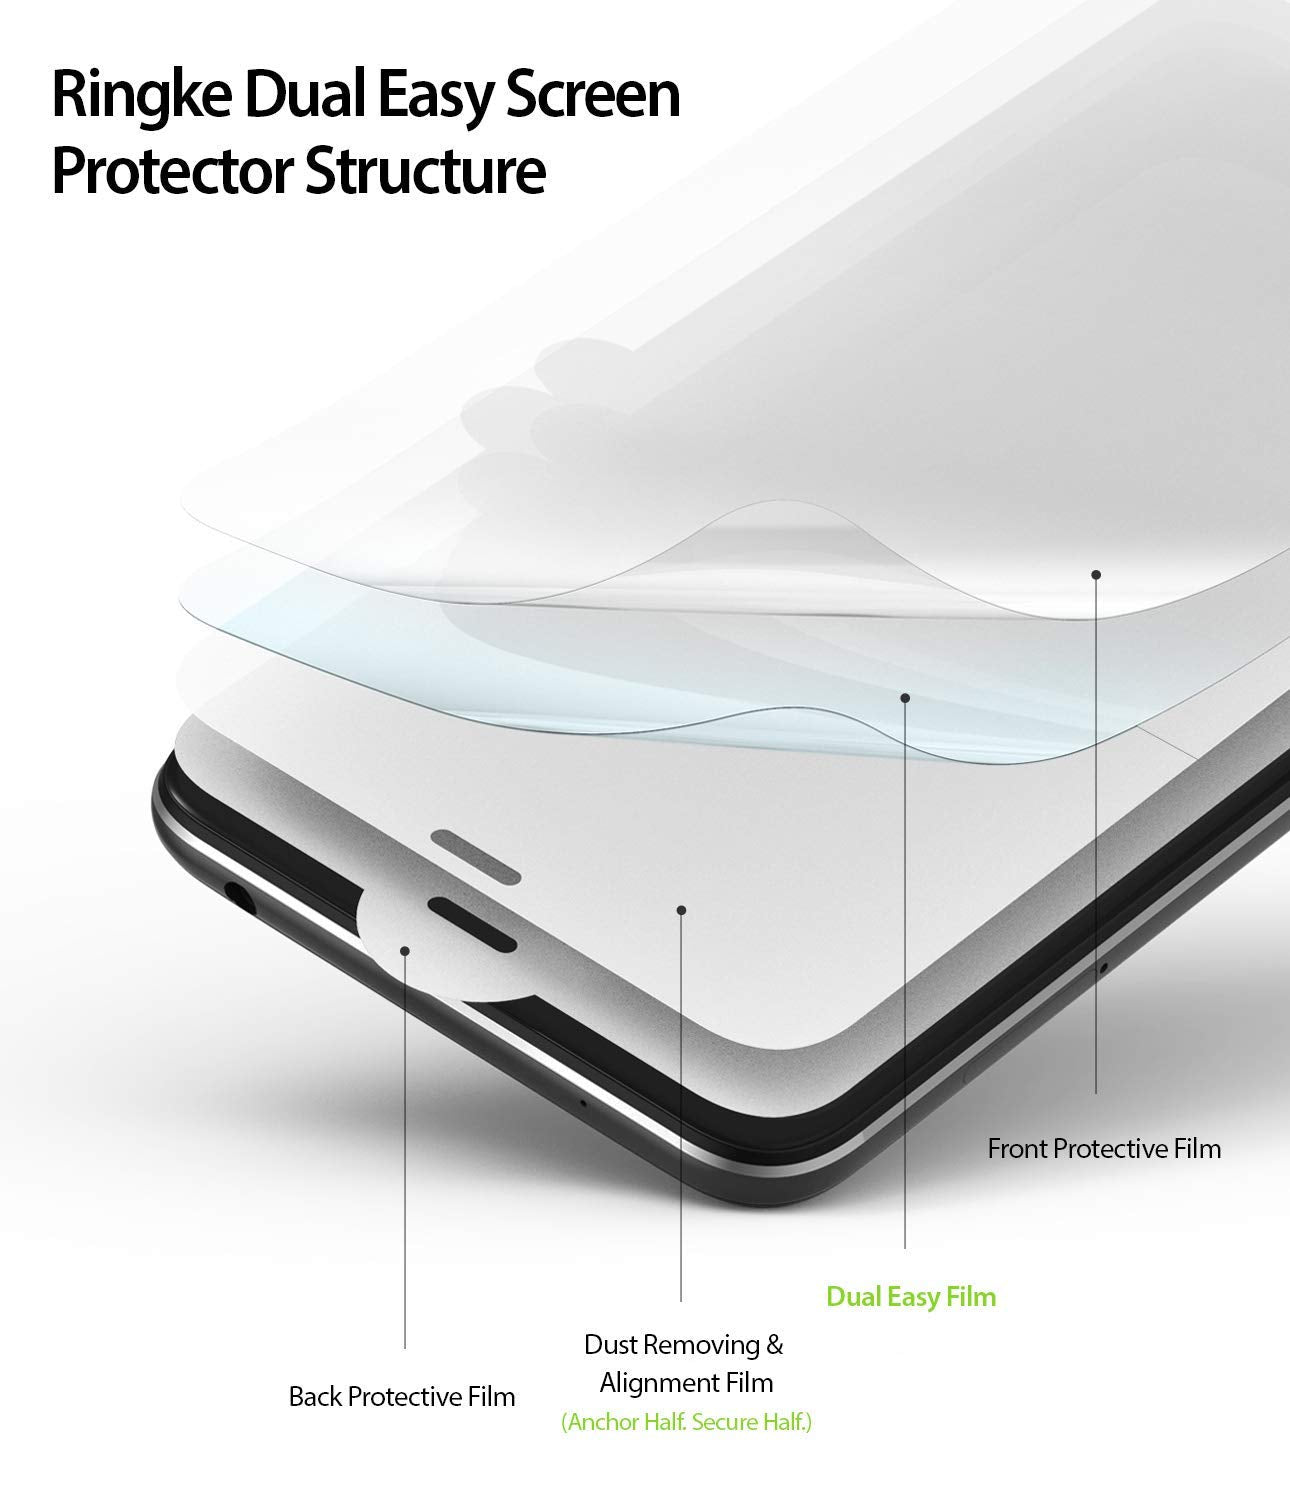 4 layer protector structure